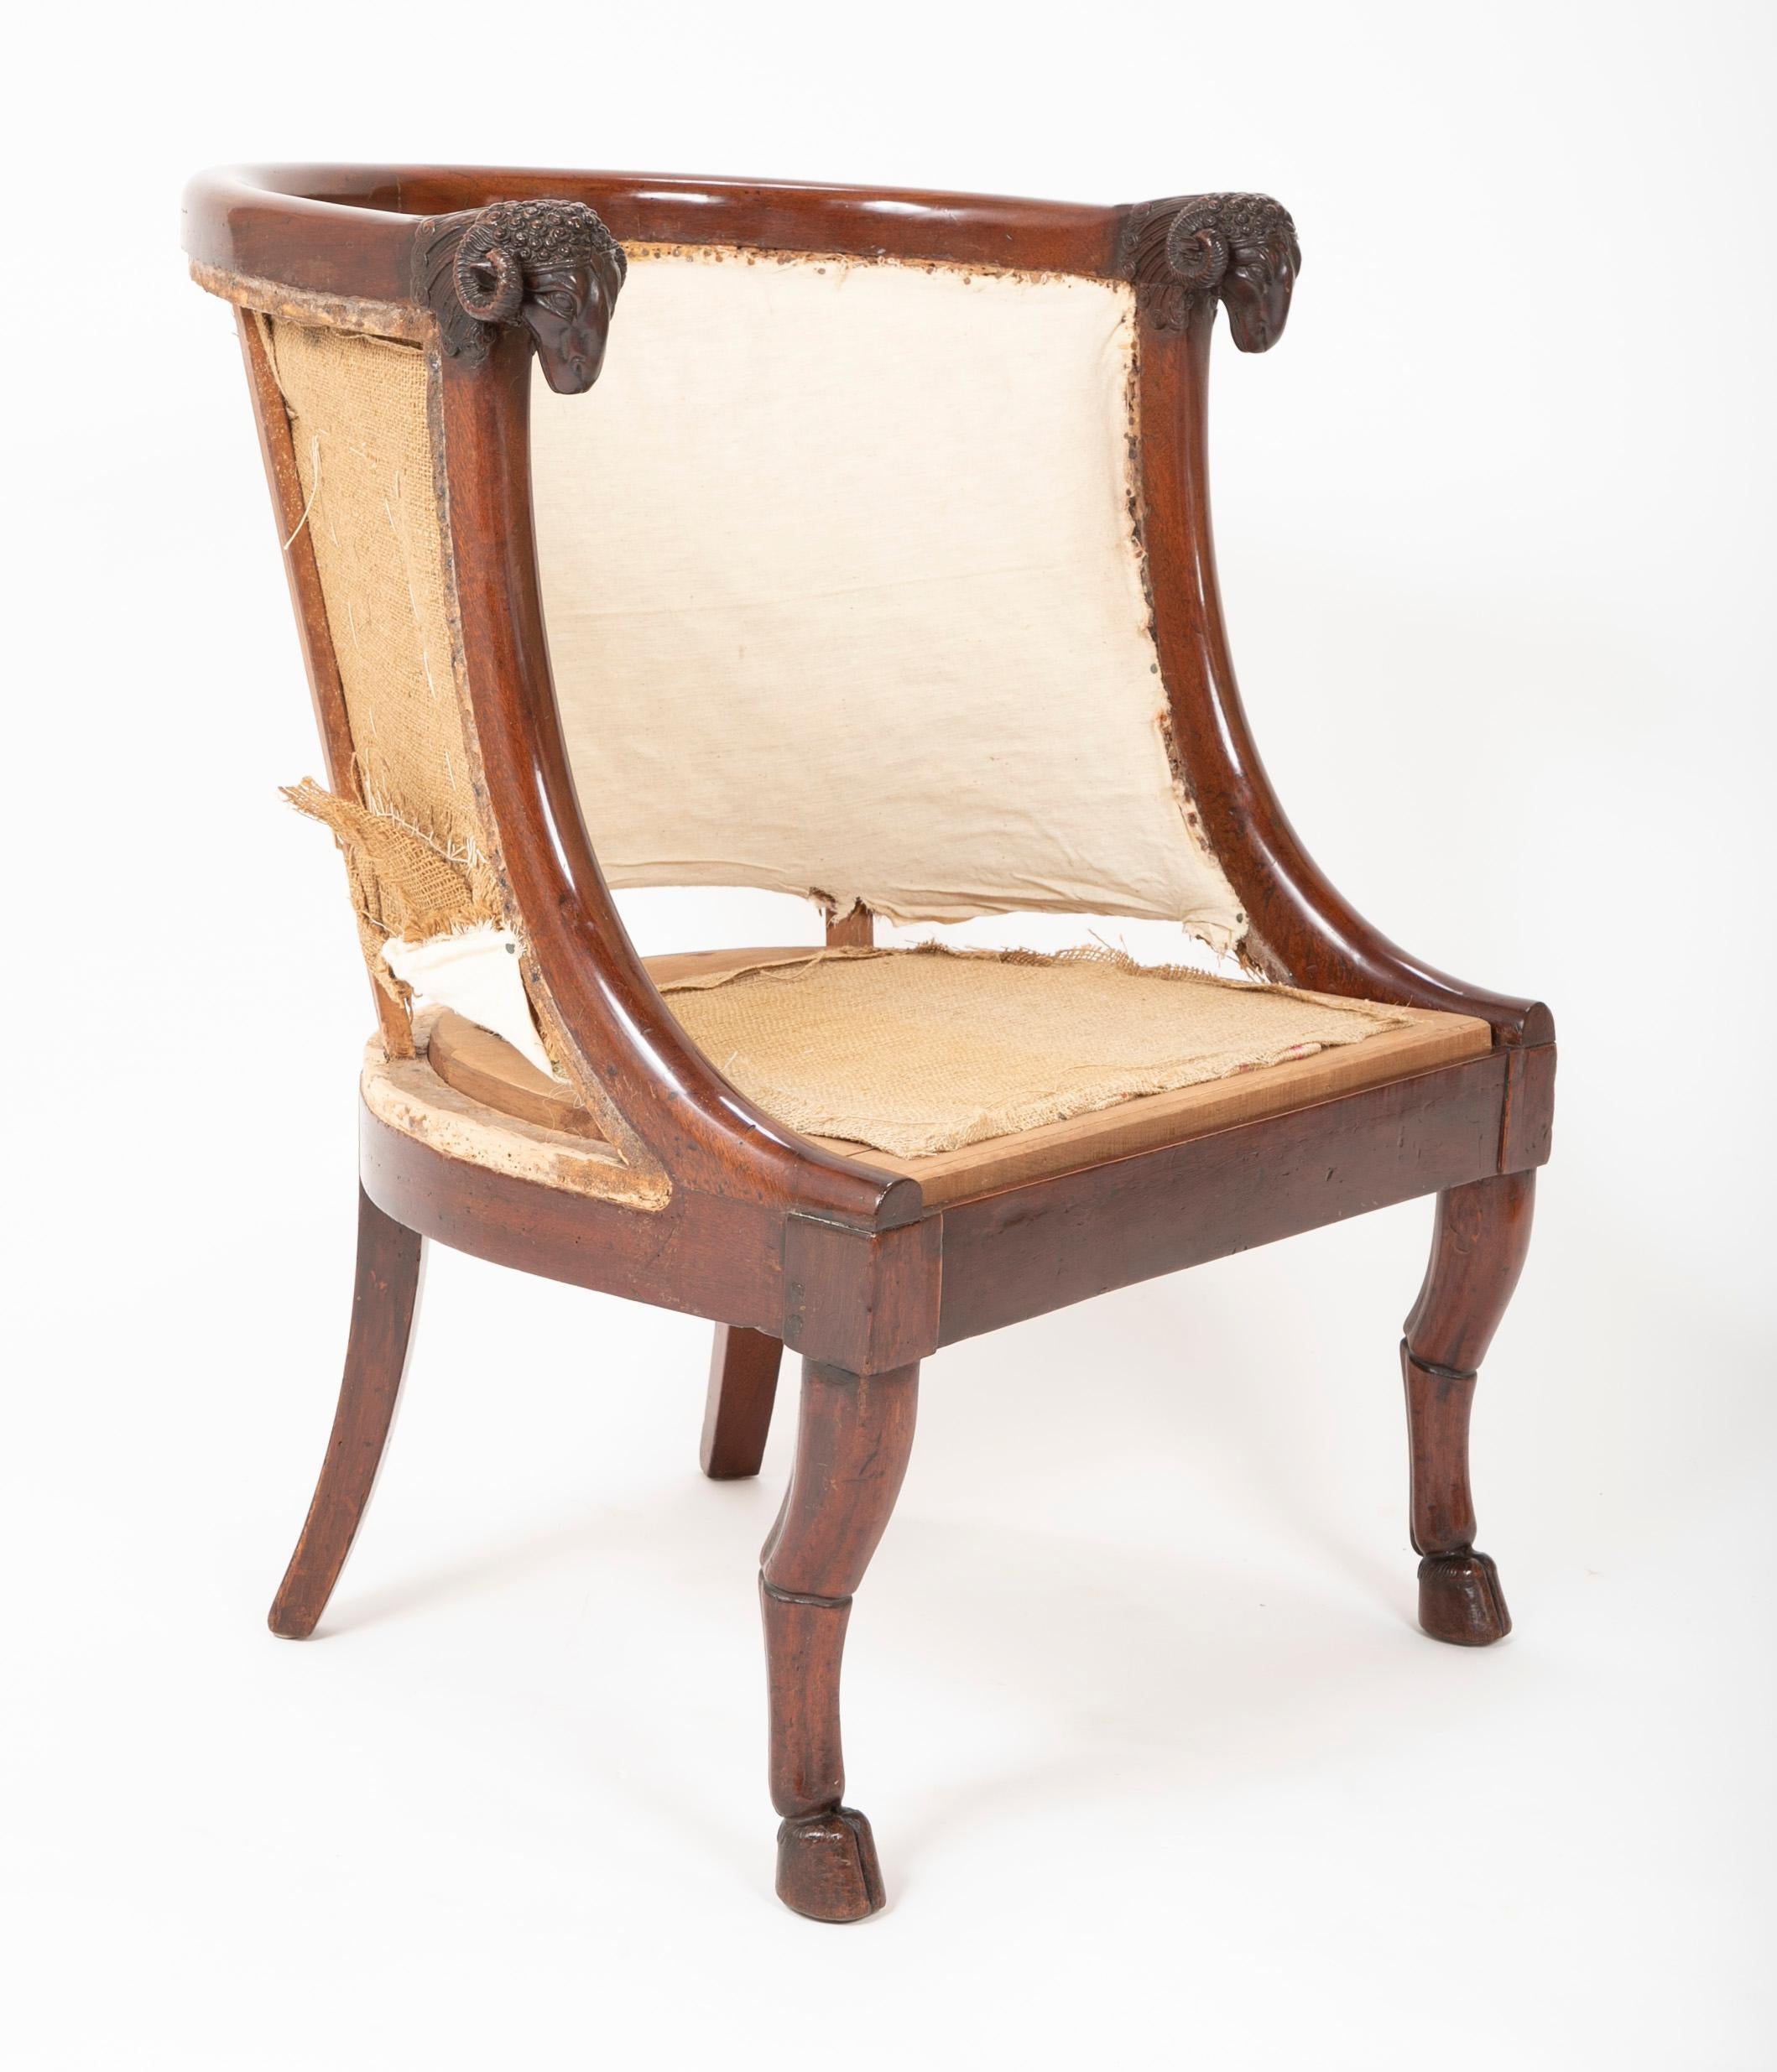 19th Century Pair of French Empire Mahogany Armchairs Attributed to Jacob Desmalter For Sale